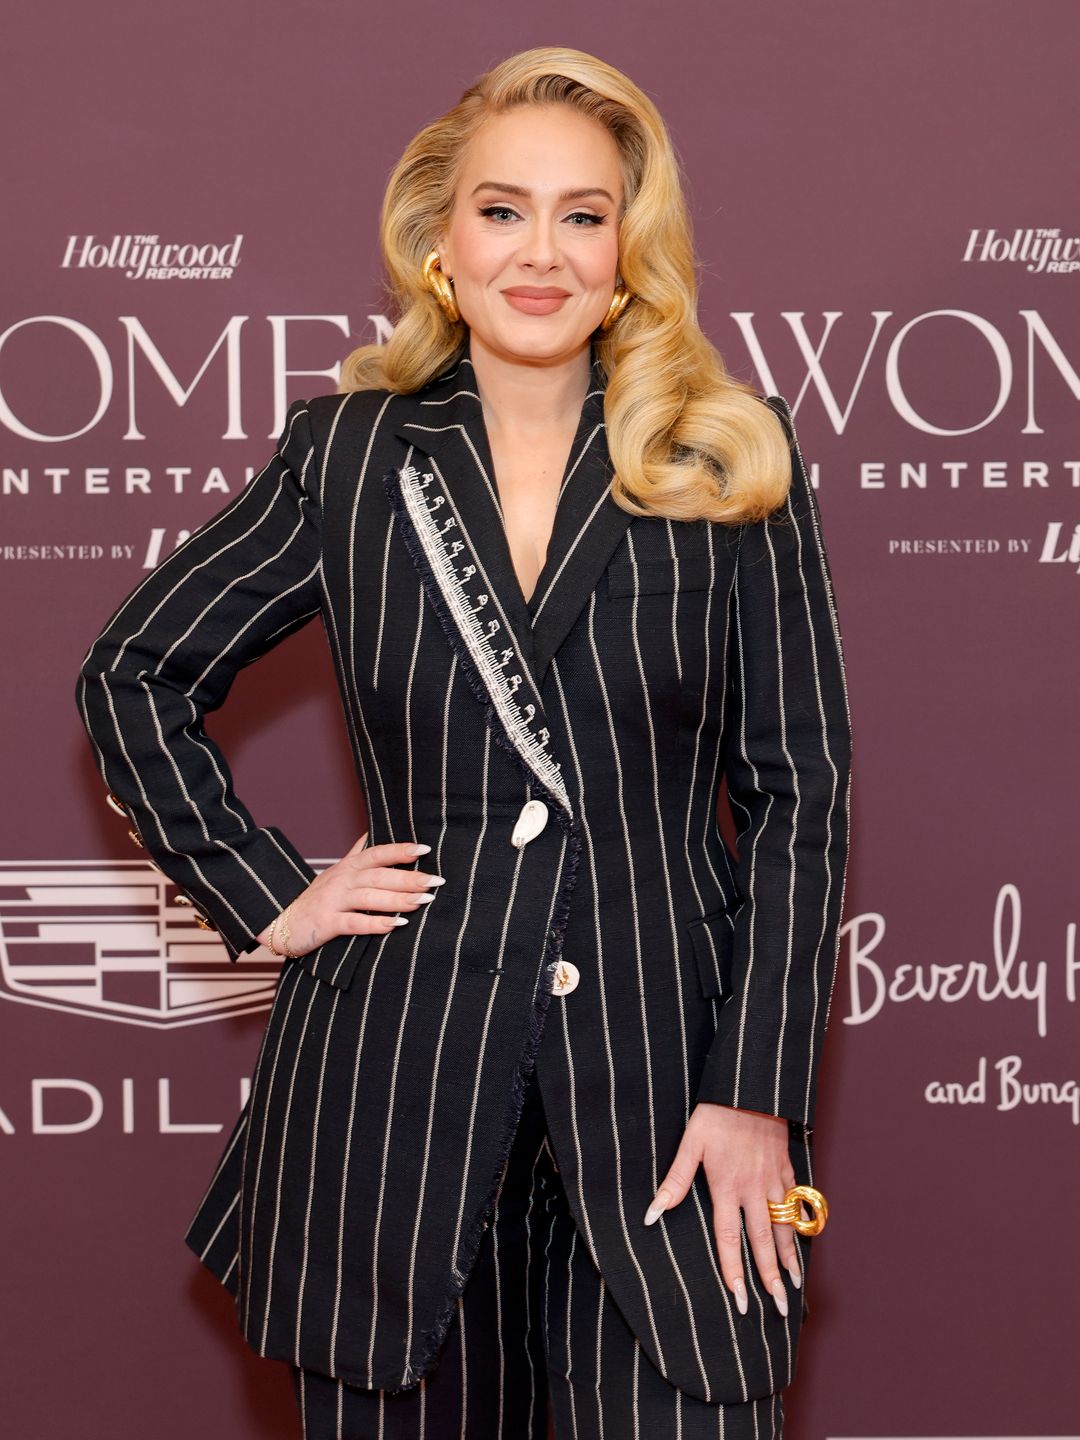 Adele on the red carpet in a striped suit